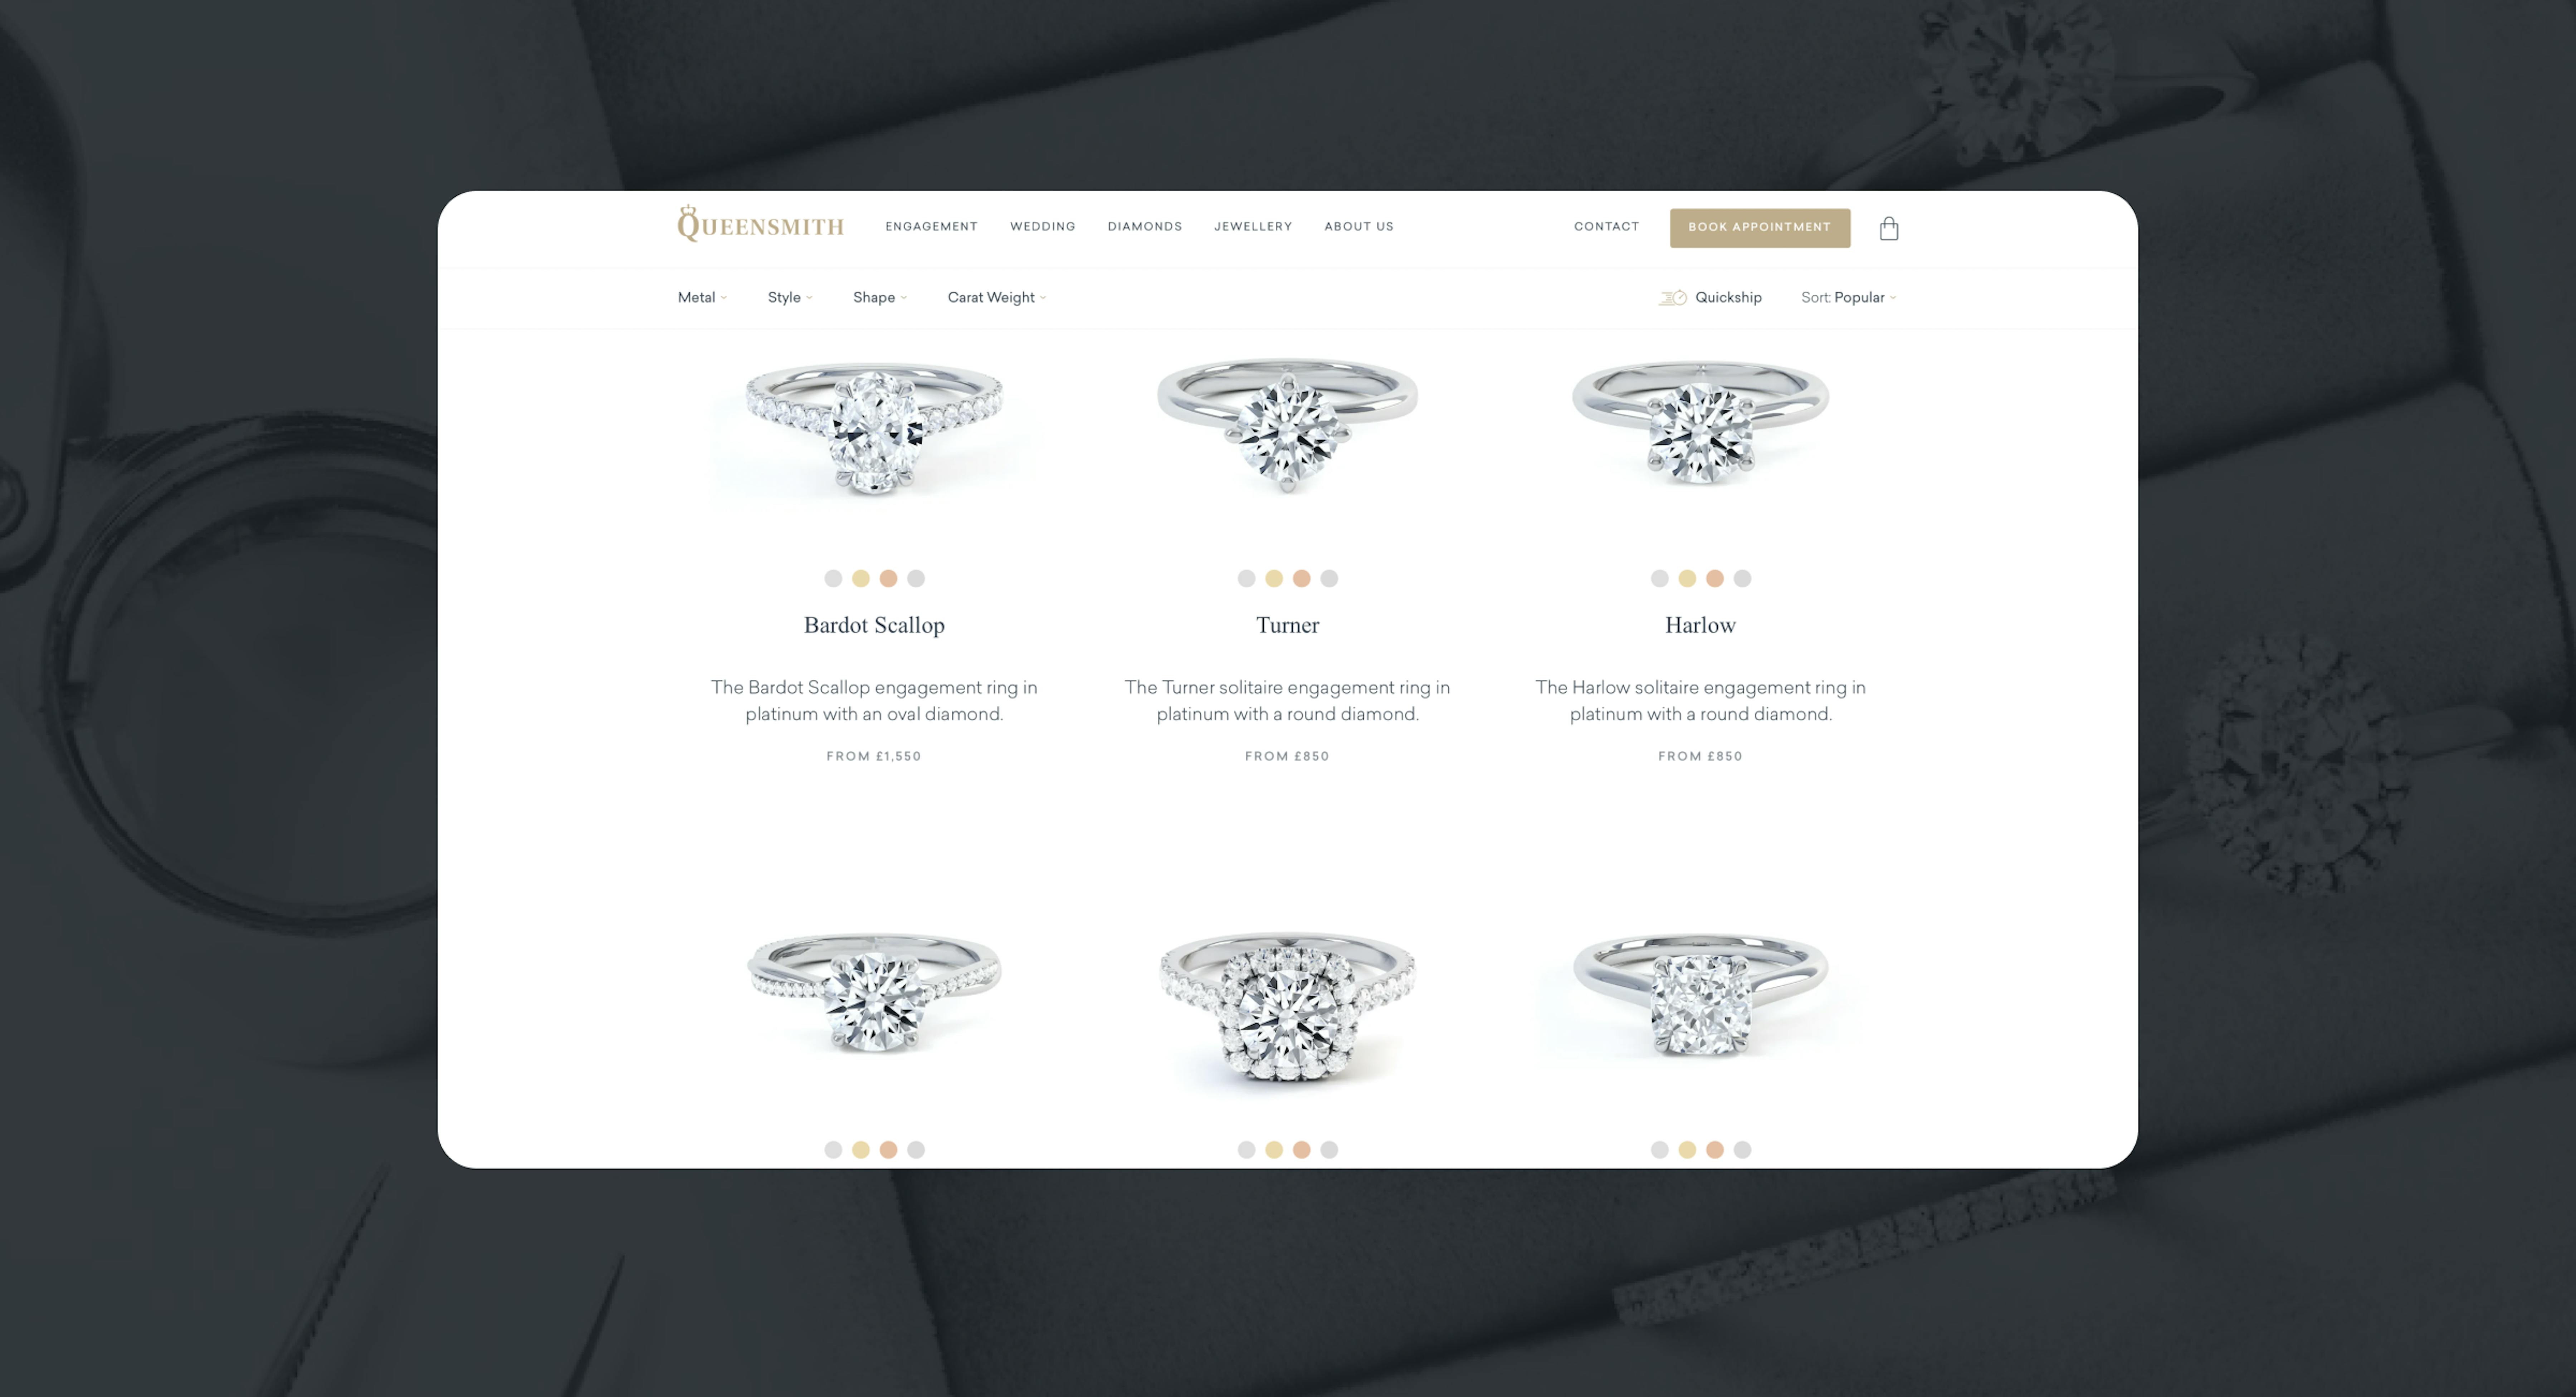 Queensmith engagement rings for imgix case study